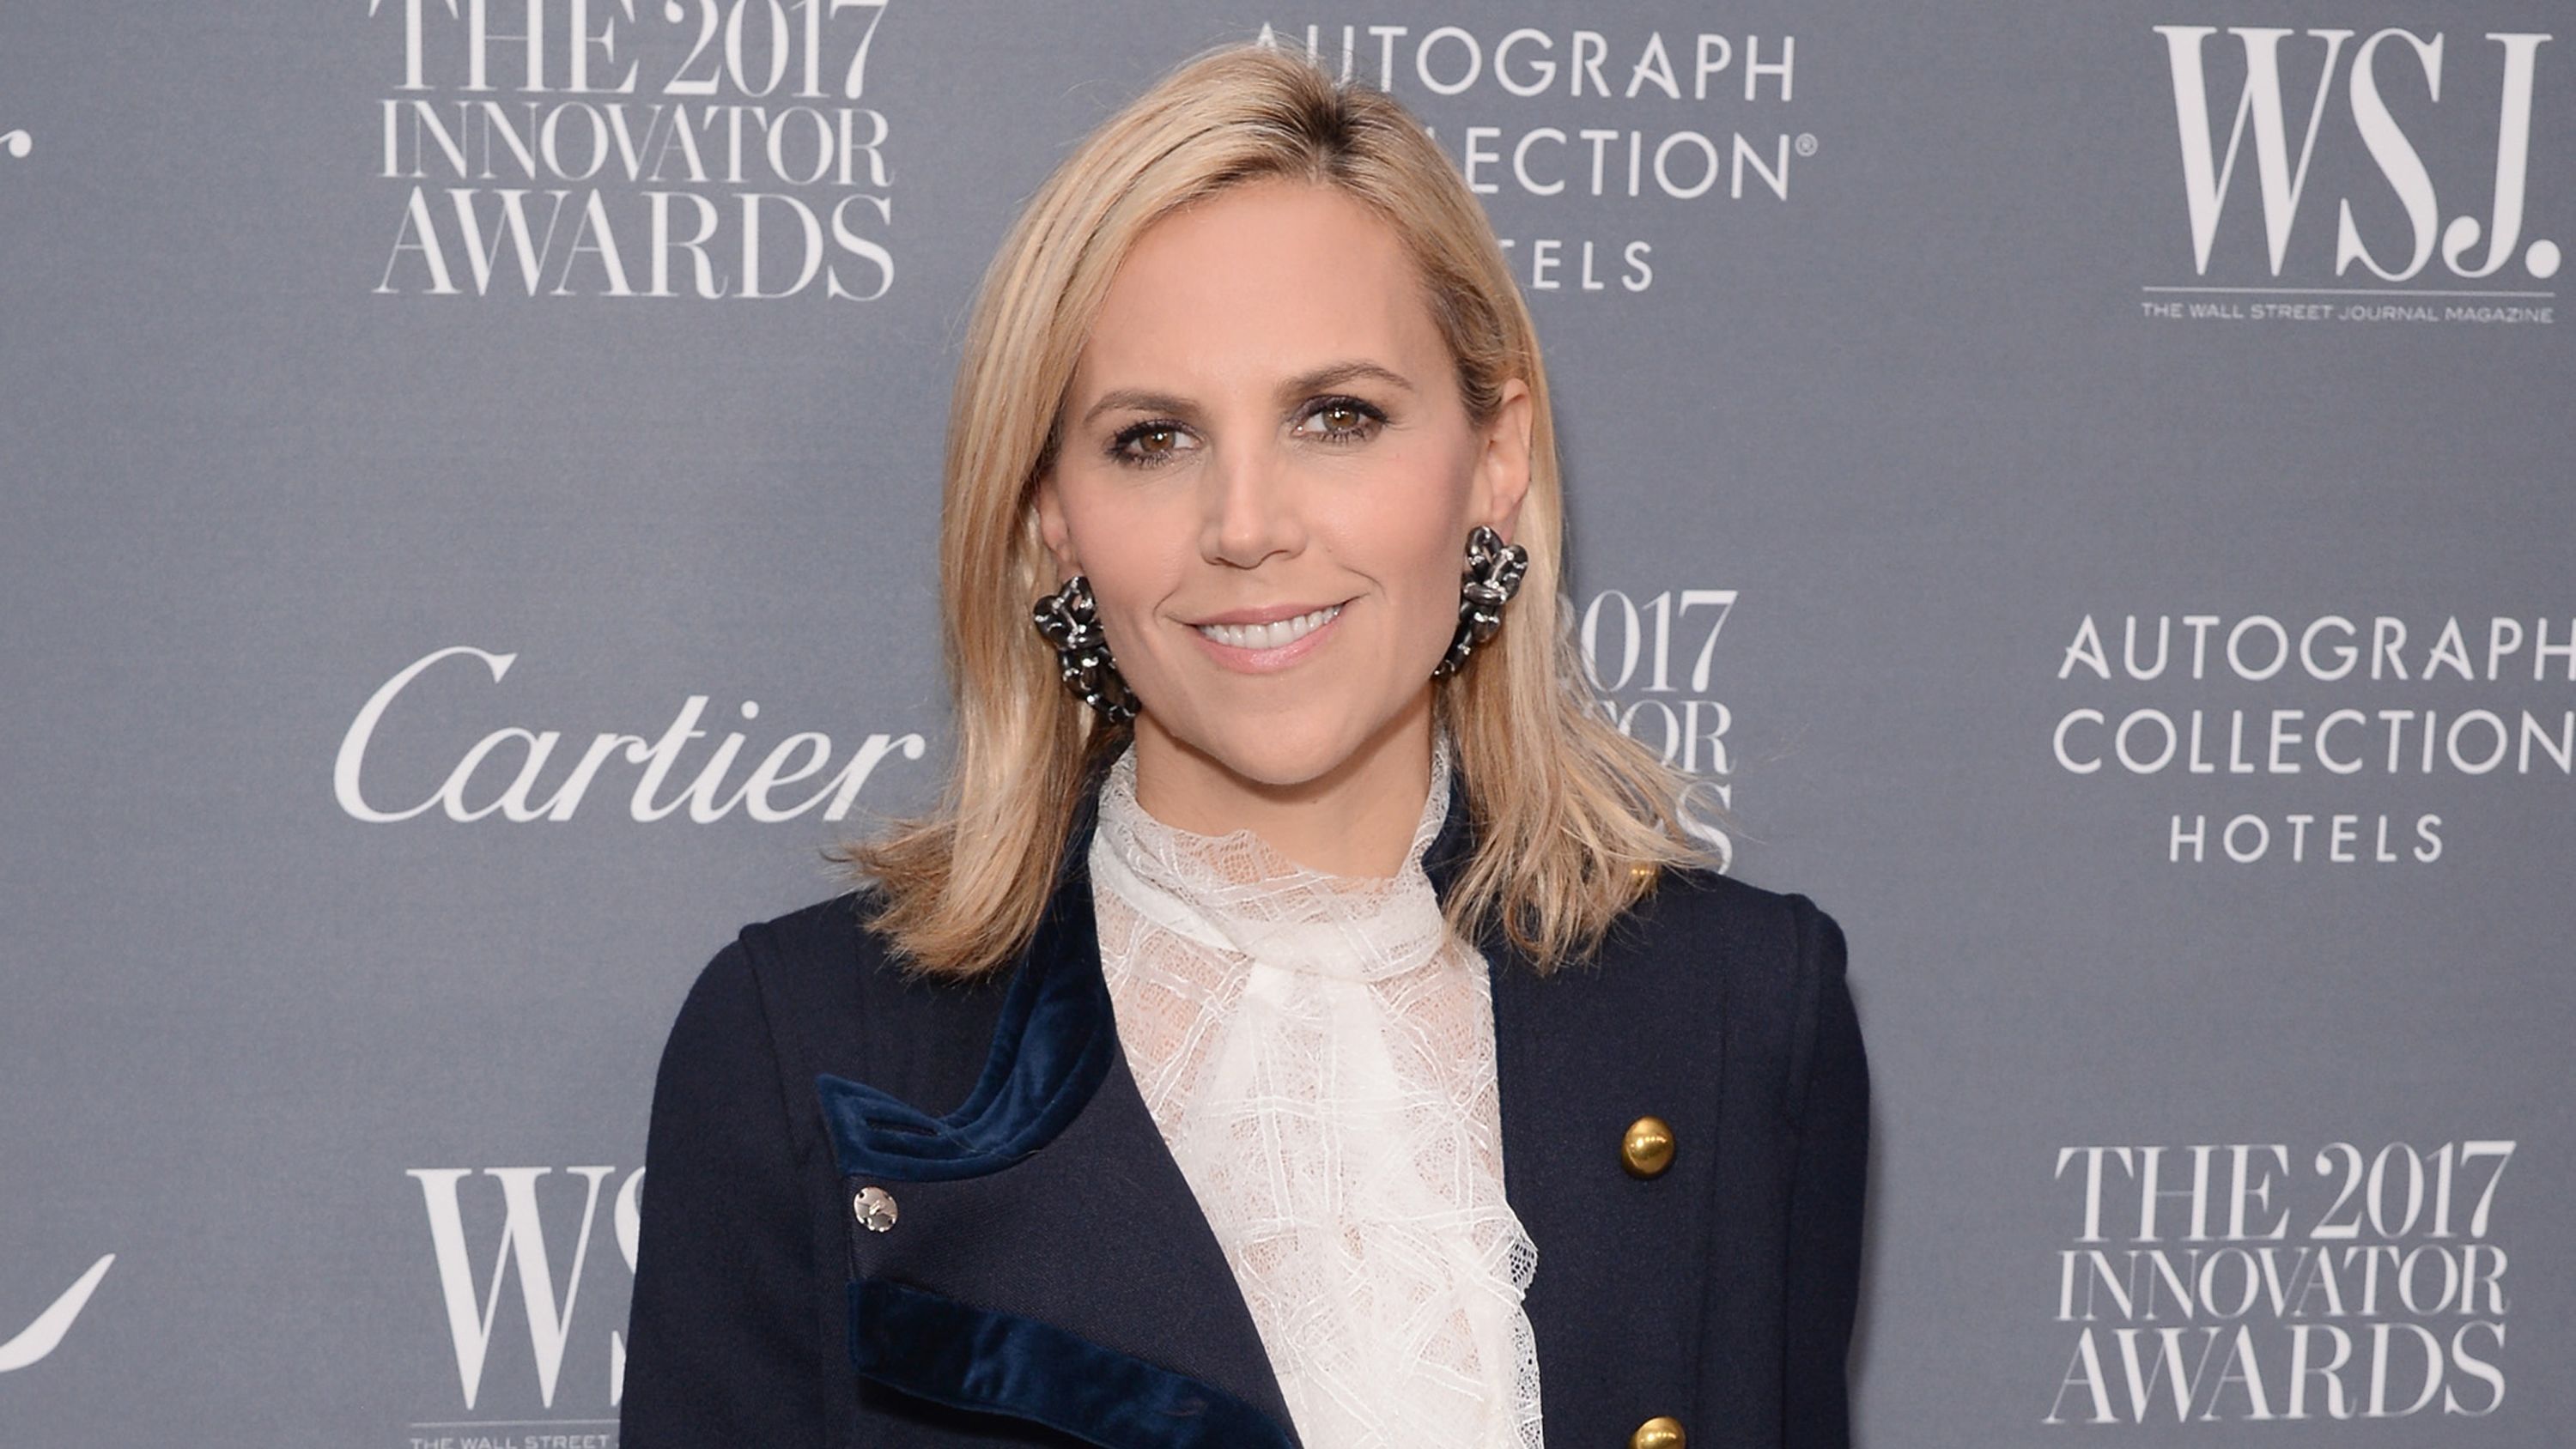 Tory Burch: 'Businesses can do well by doing good' | CNN Business